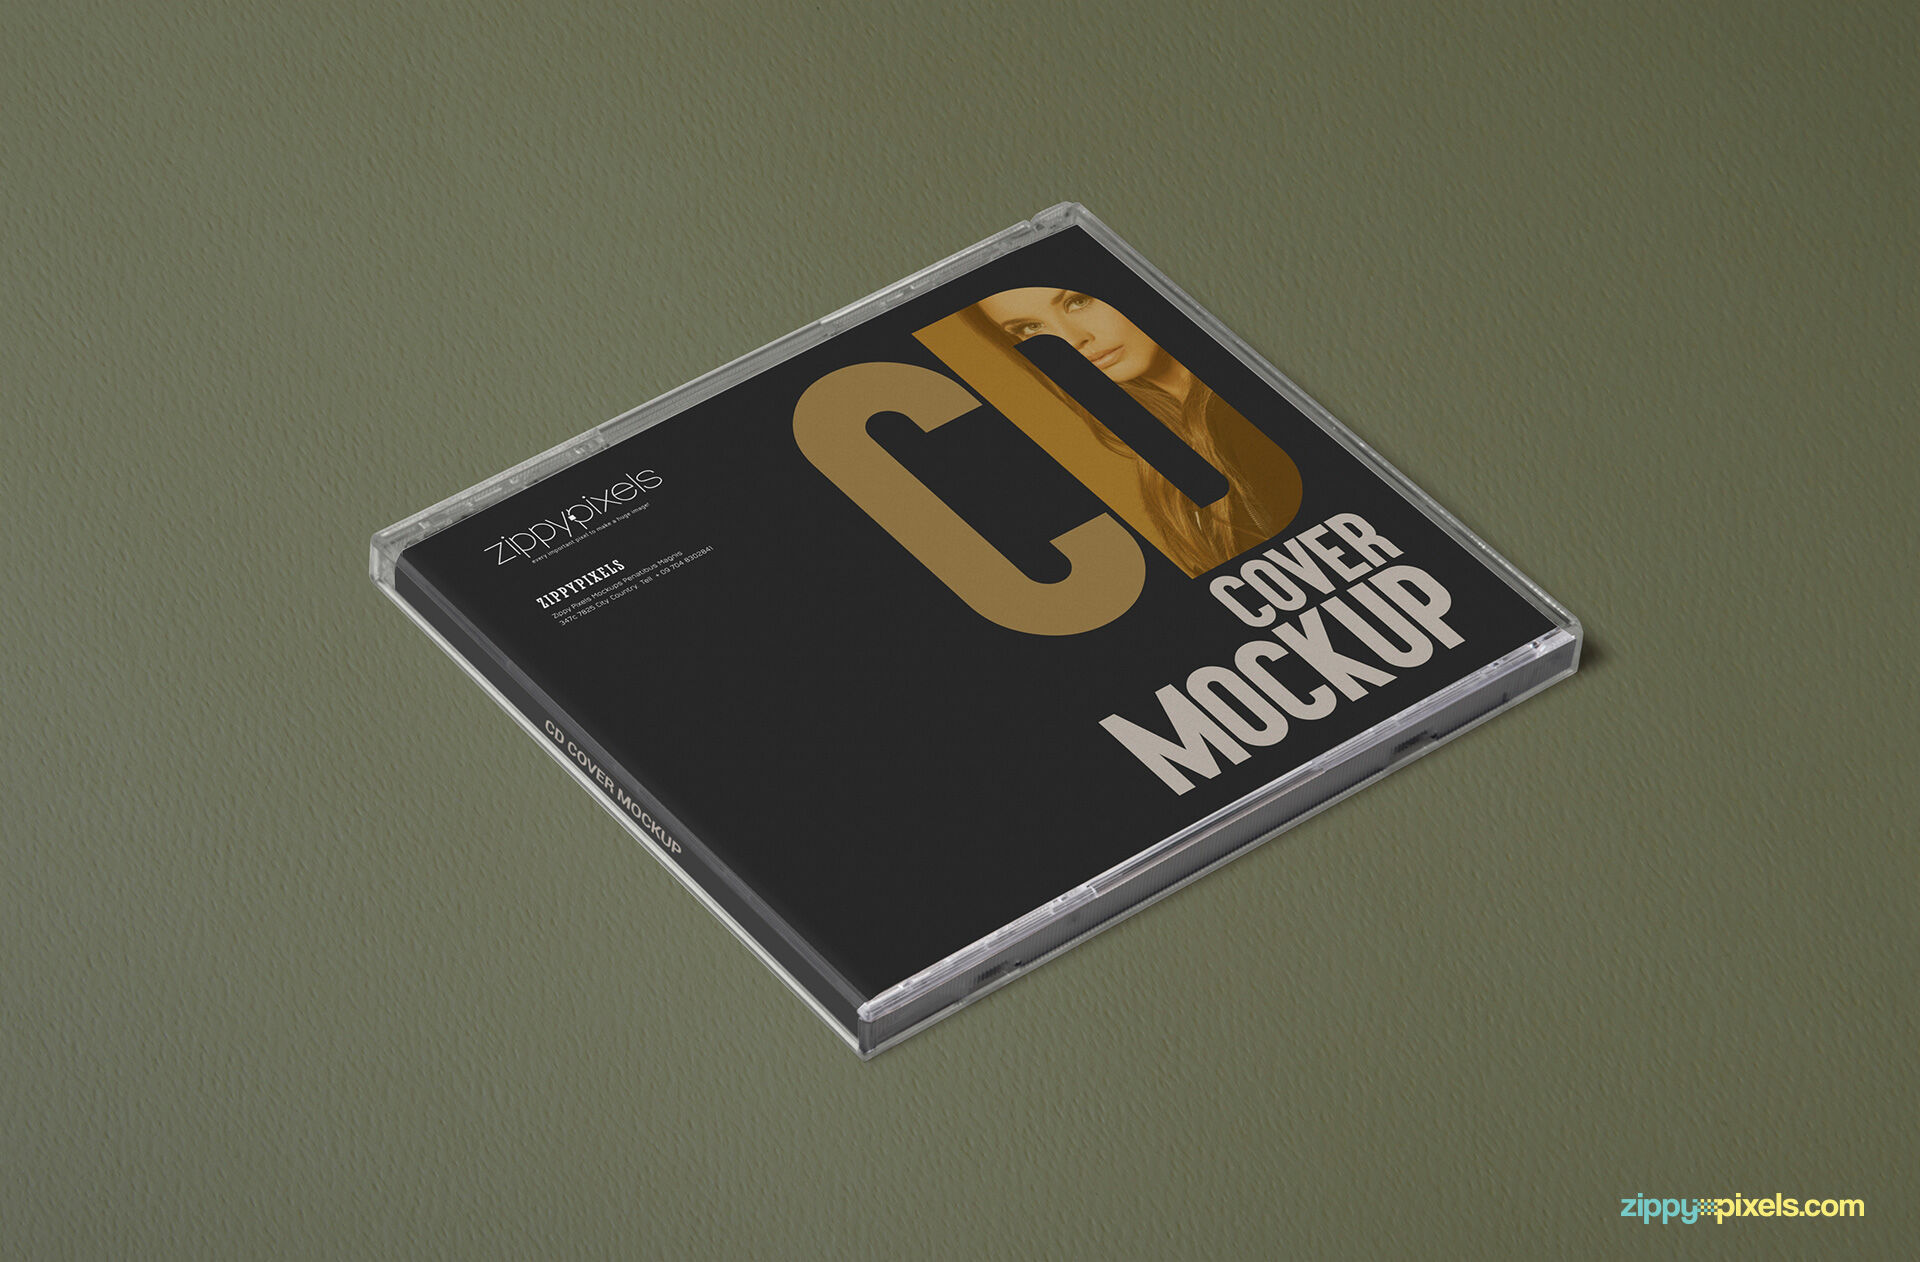 Mockup Featuring Closed and Opened CD Case Containing a CD FREE PSD